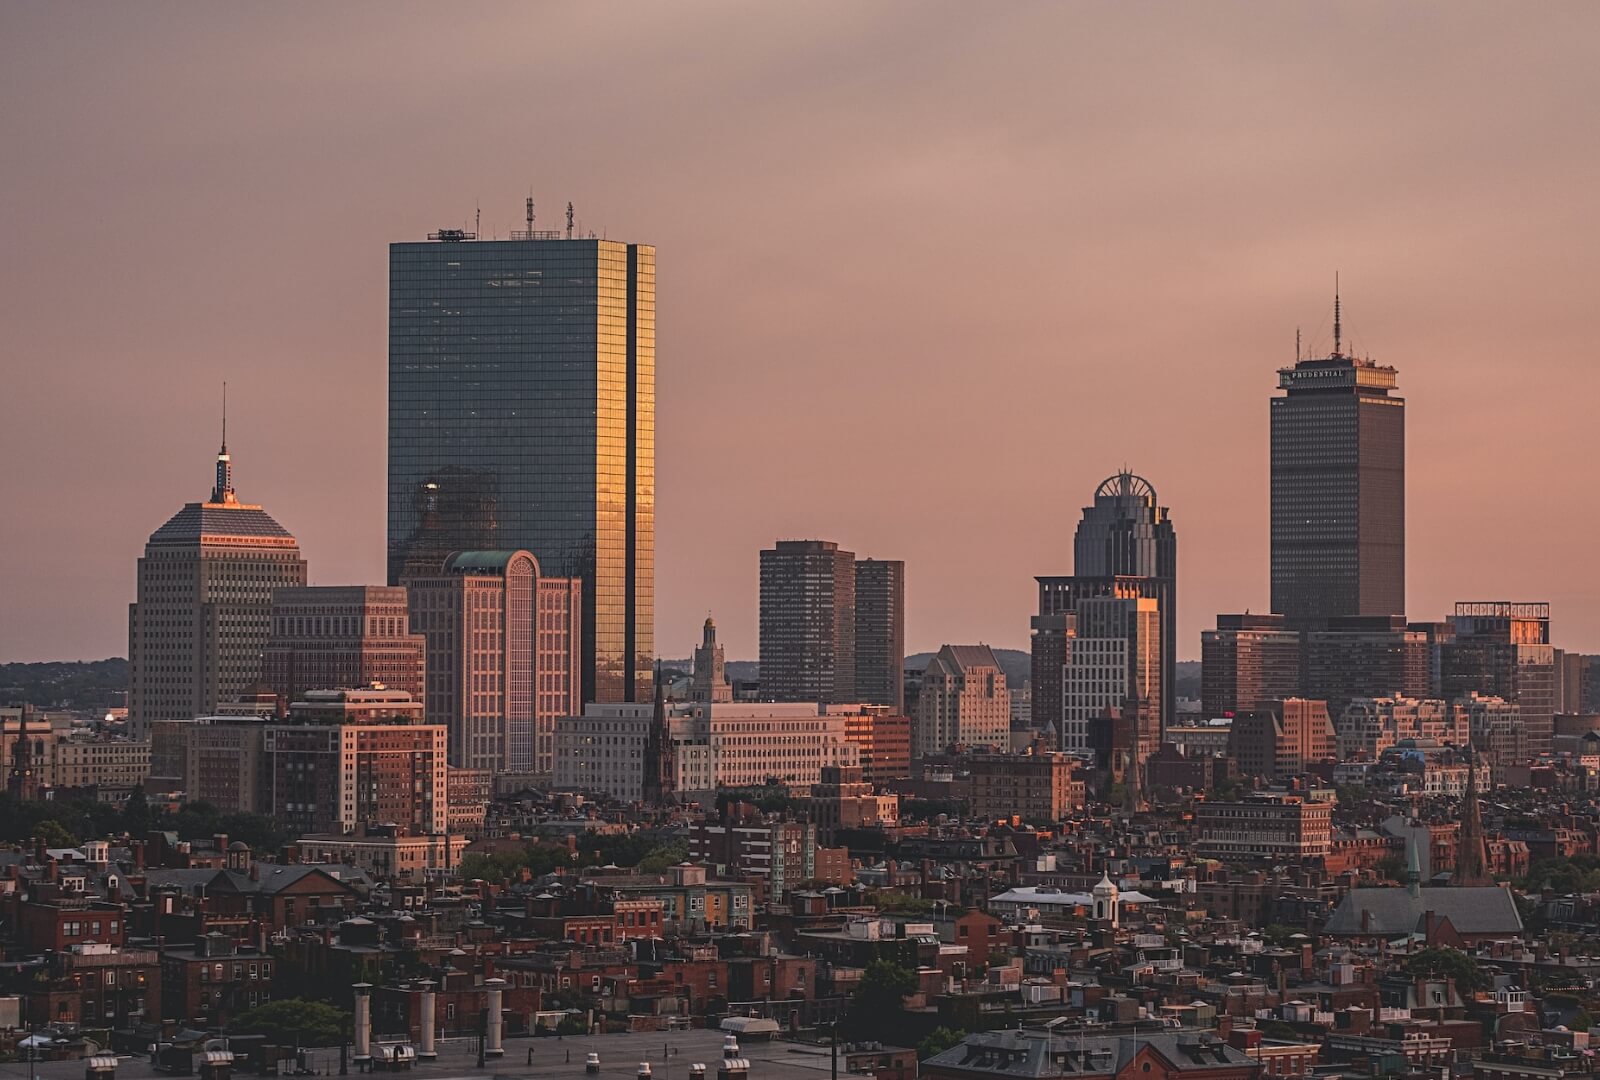 image of the city of Boston